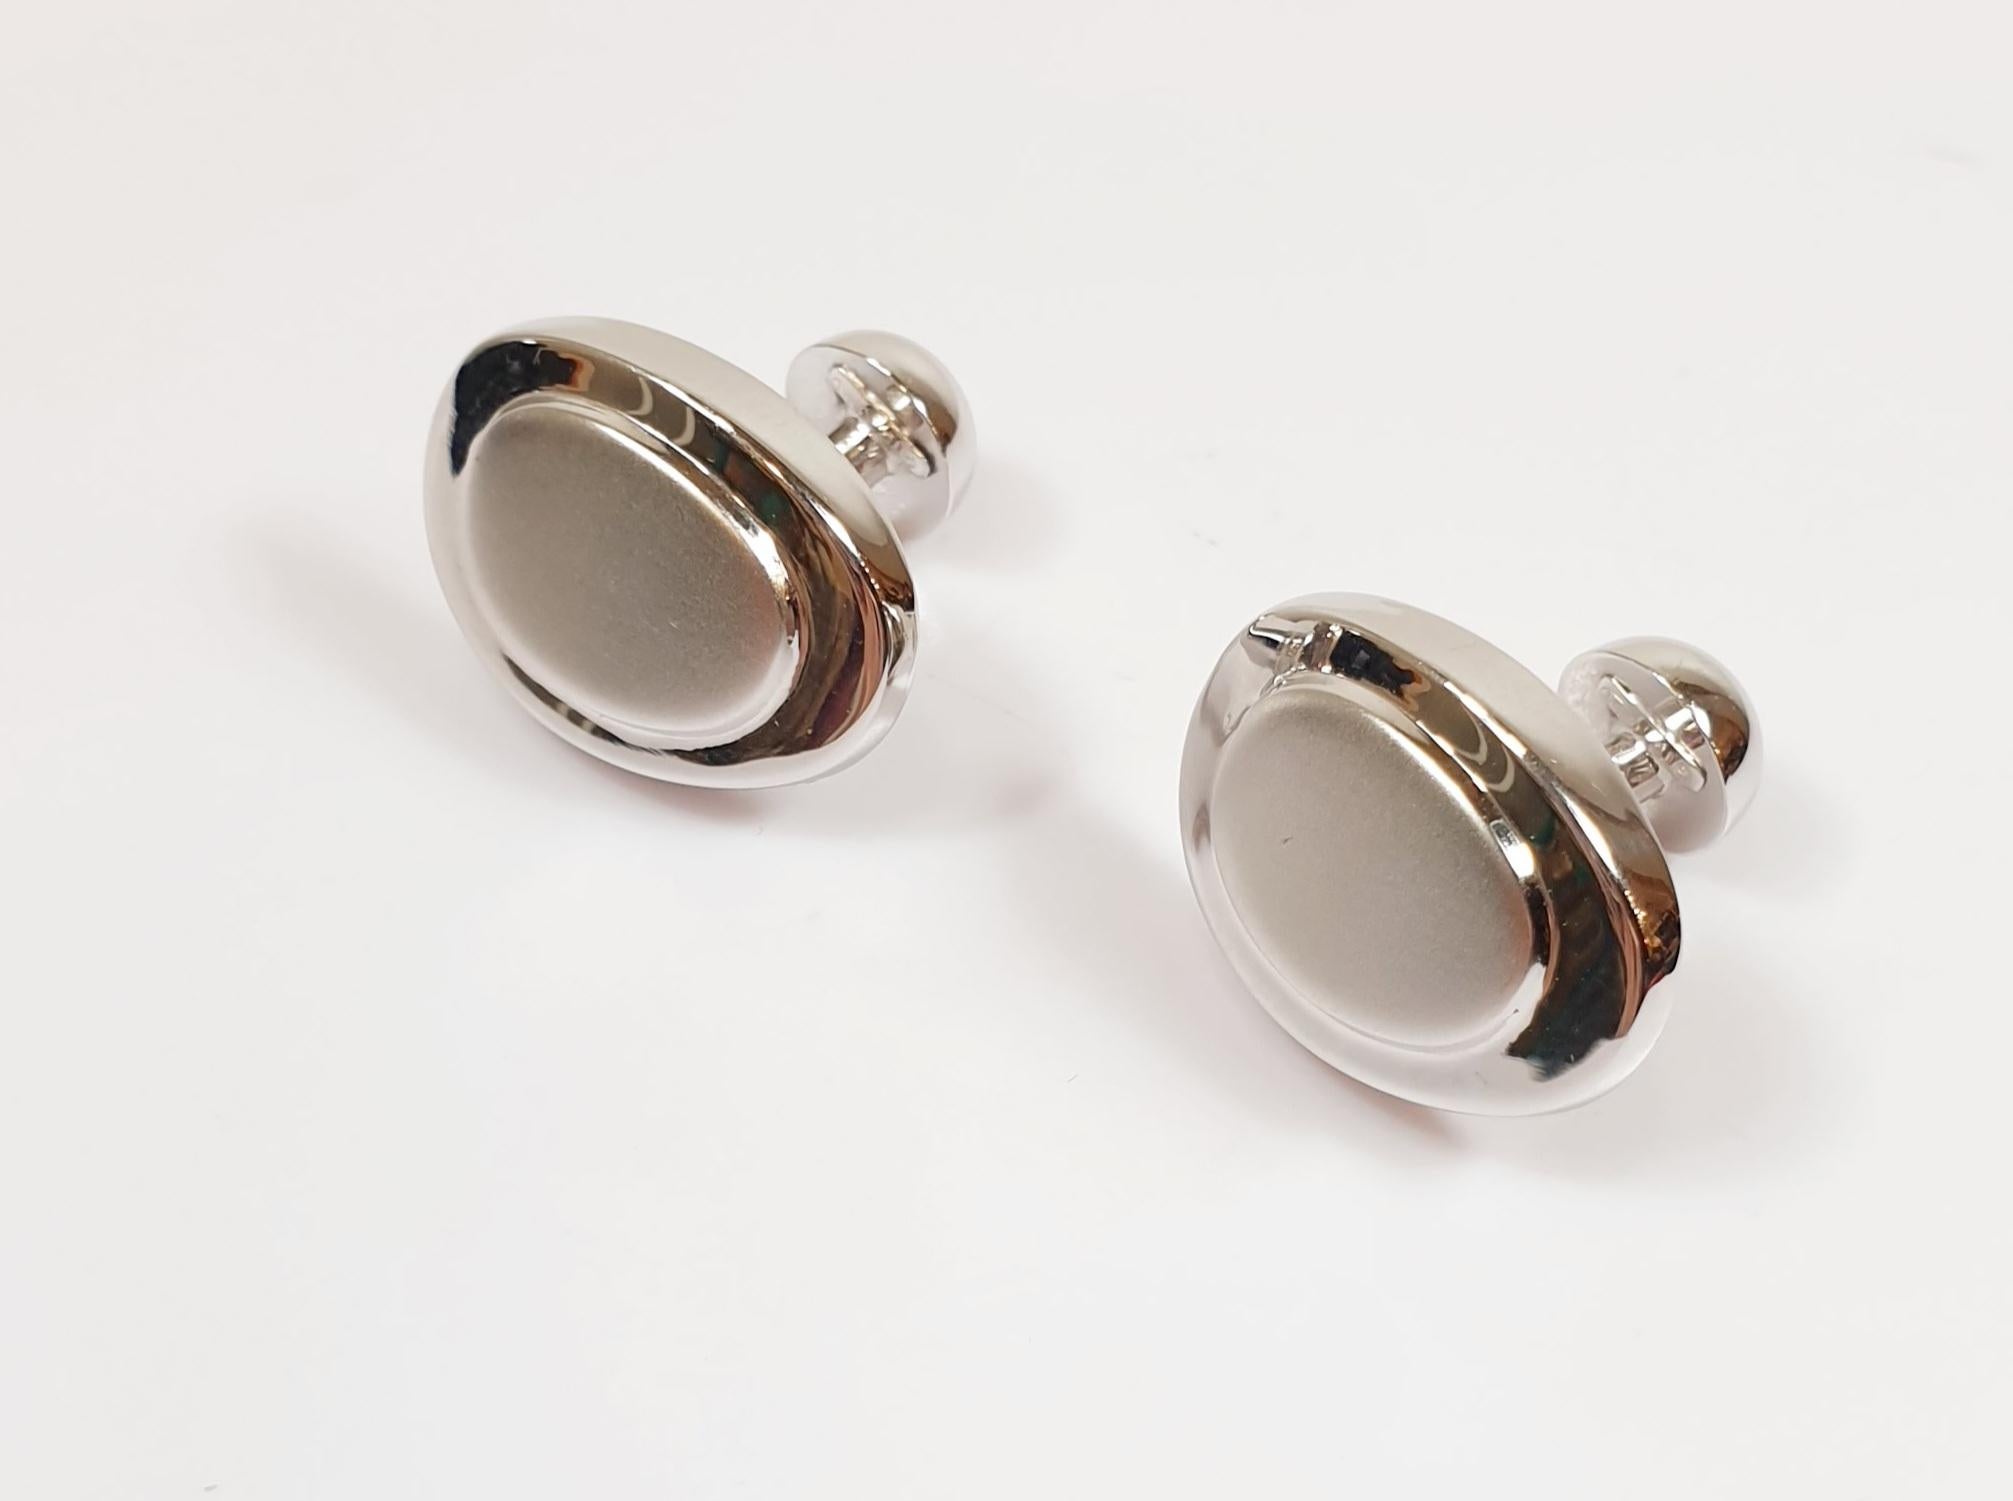 Vintage White Gold and Matt White Gold Cufflinks

MATERIALS
◘ Weight 5 gr

Cufflinks, a watch and a tie have always been distinctive signs of a true gentleman, since luxury is achieved.. 

PRADERA is a second generation of a family run business